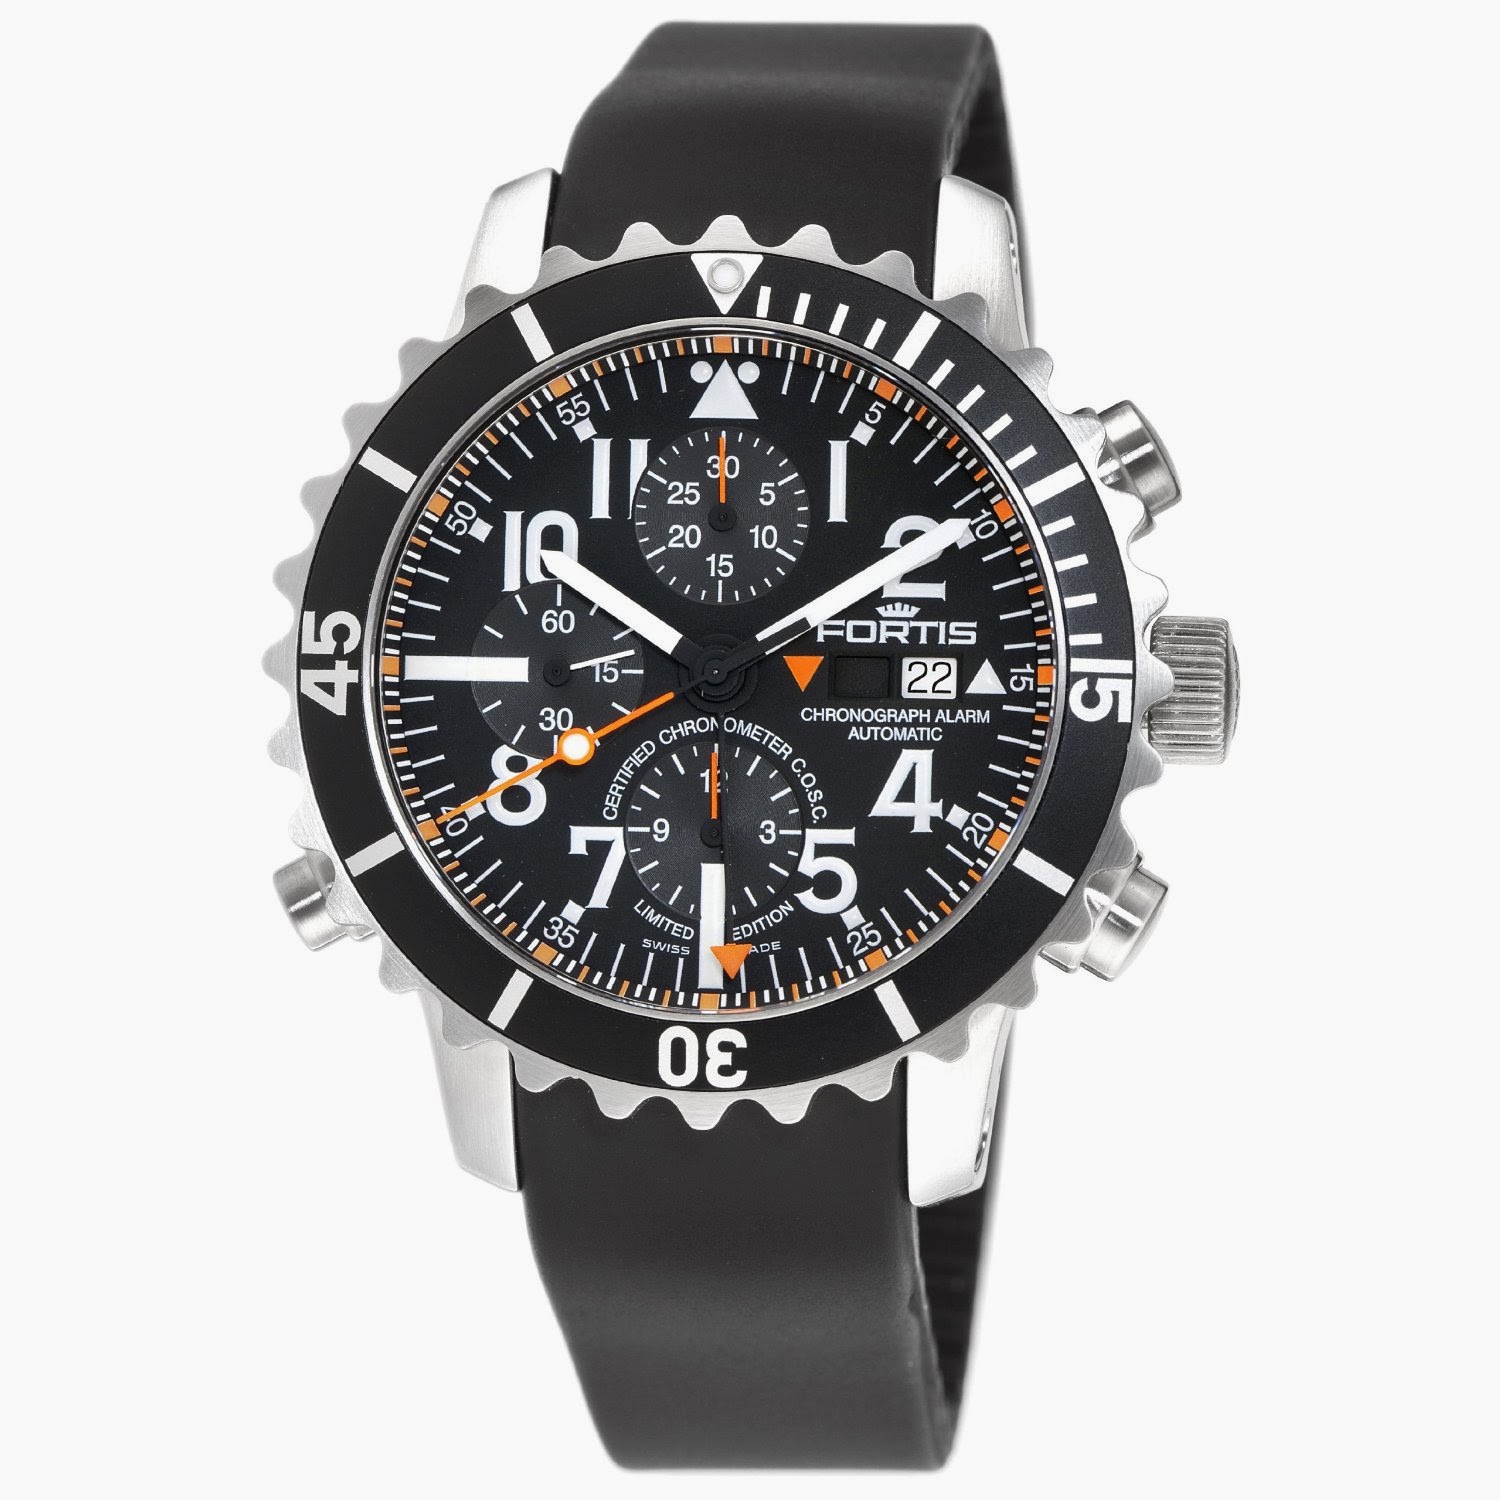 Best Watches Brands for Men | Top, Cool, Popular and Most Expensive ...